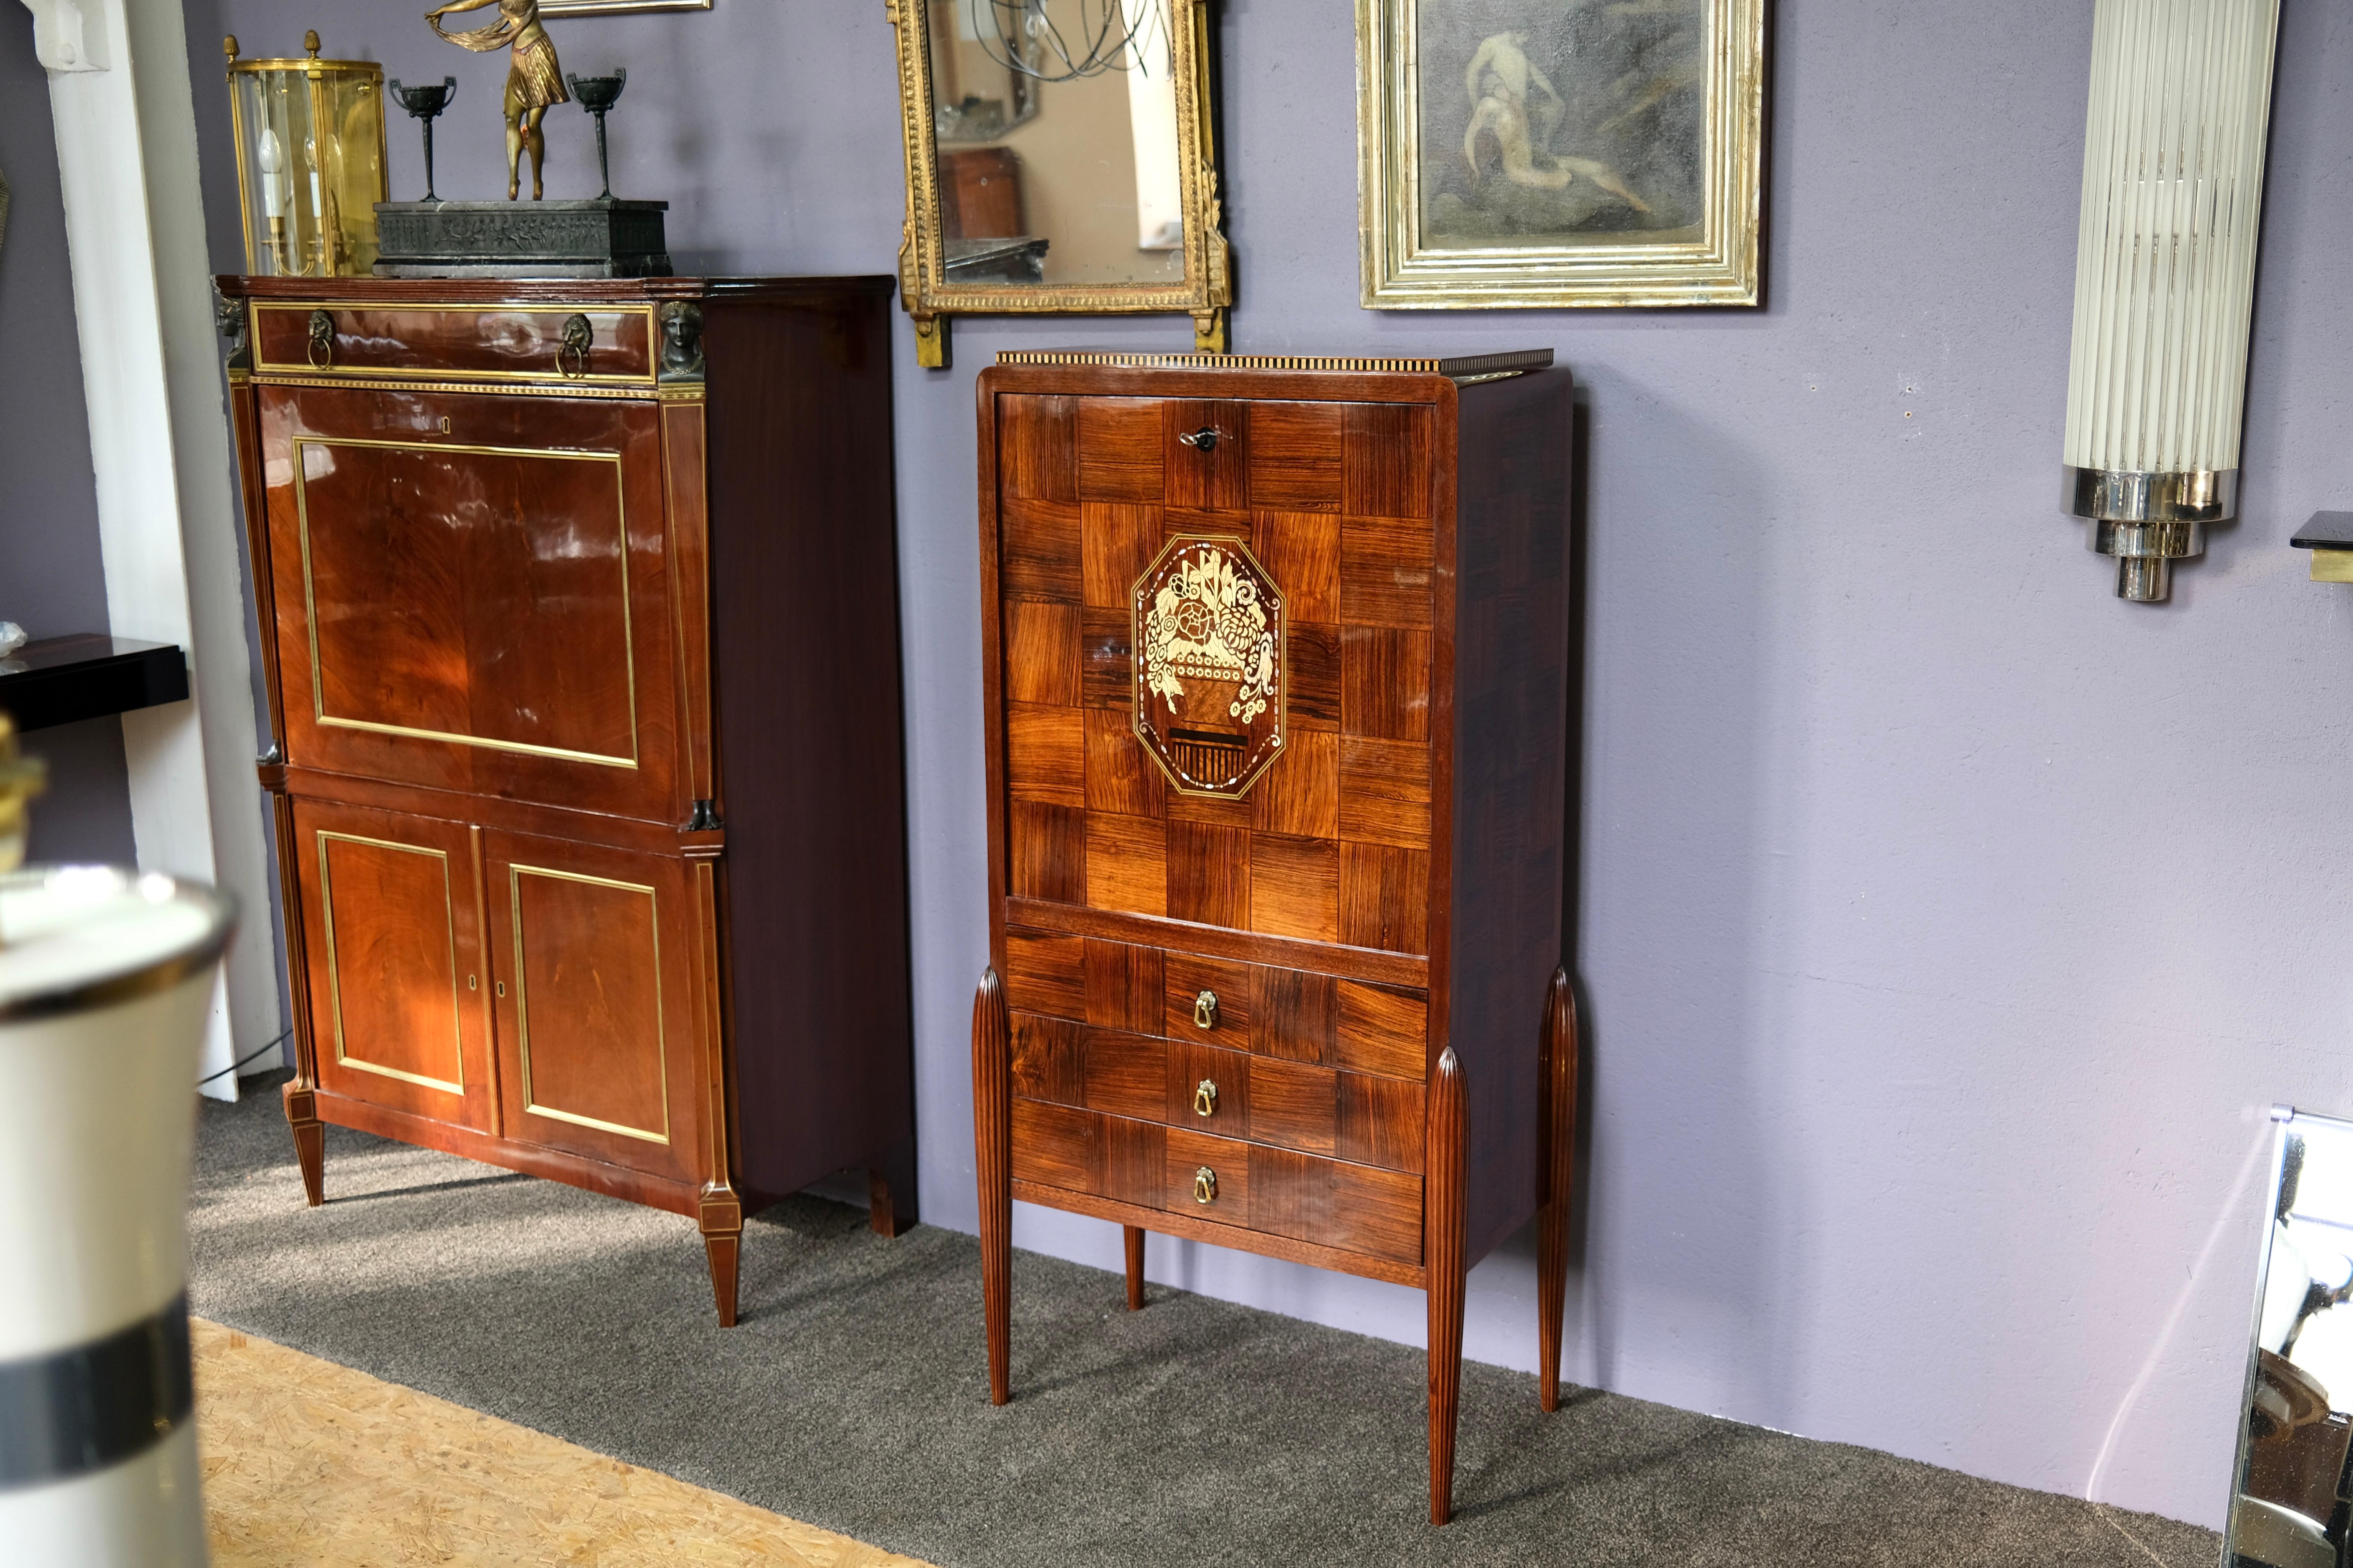 Secretary
Wooden body, hand-polished shellac
probably stained ash
elaborate inlays and marquetry 
freshly mirrored inside

Early Art Déco, France around 1925

Dimensions:
Width: 70 cm
Height: 140 cm
Depth: 40 cm
Body (without legs): 64.5 cm wide /